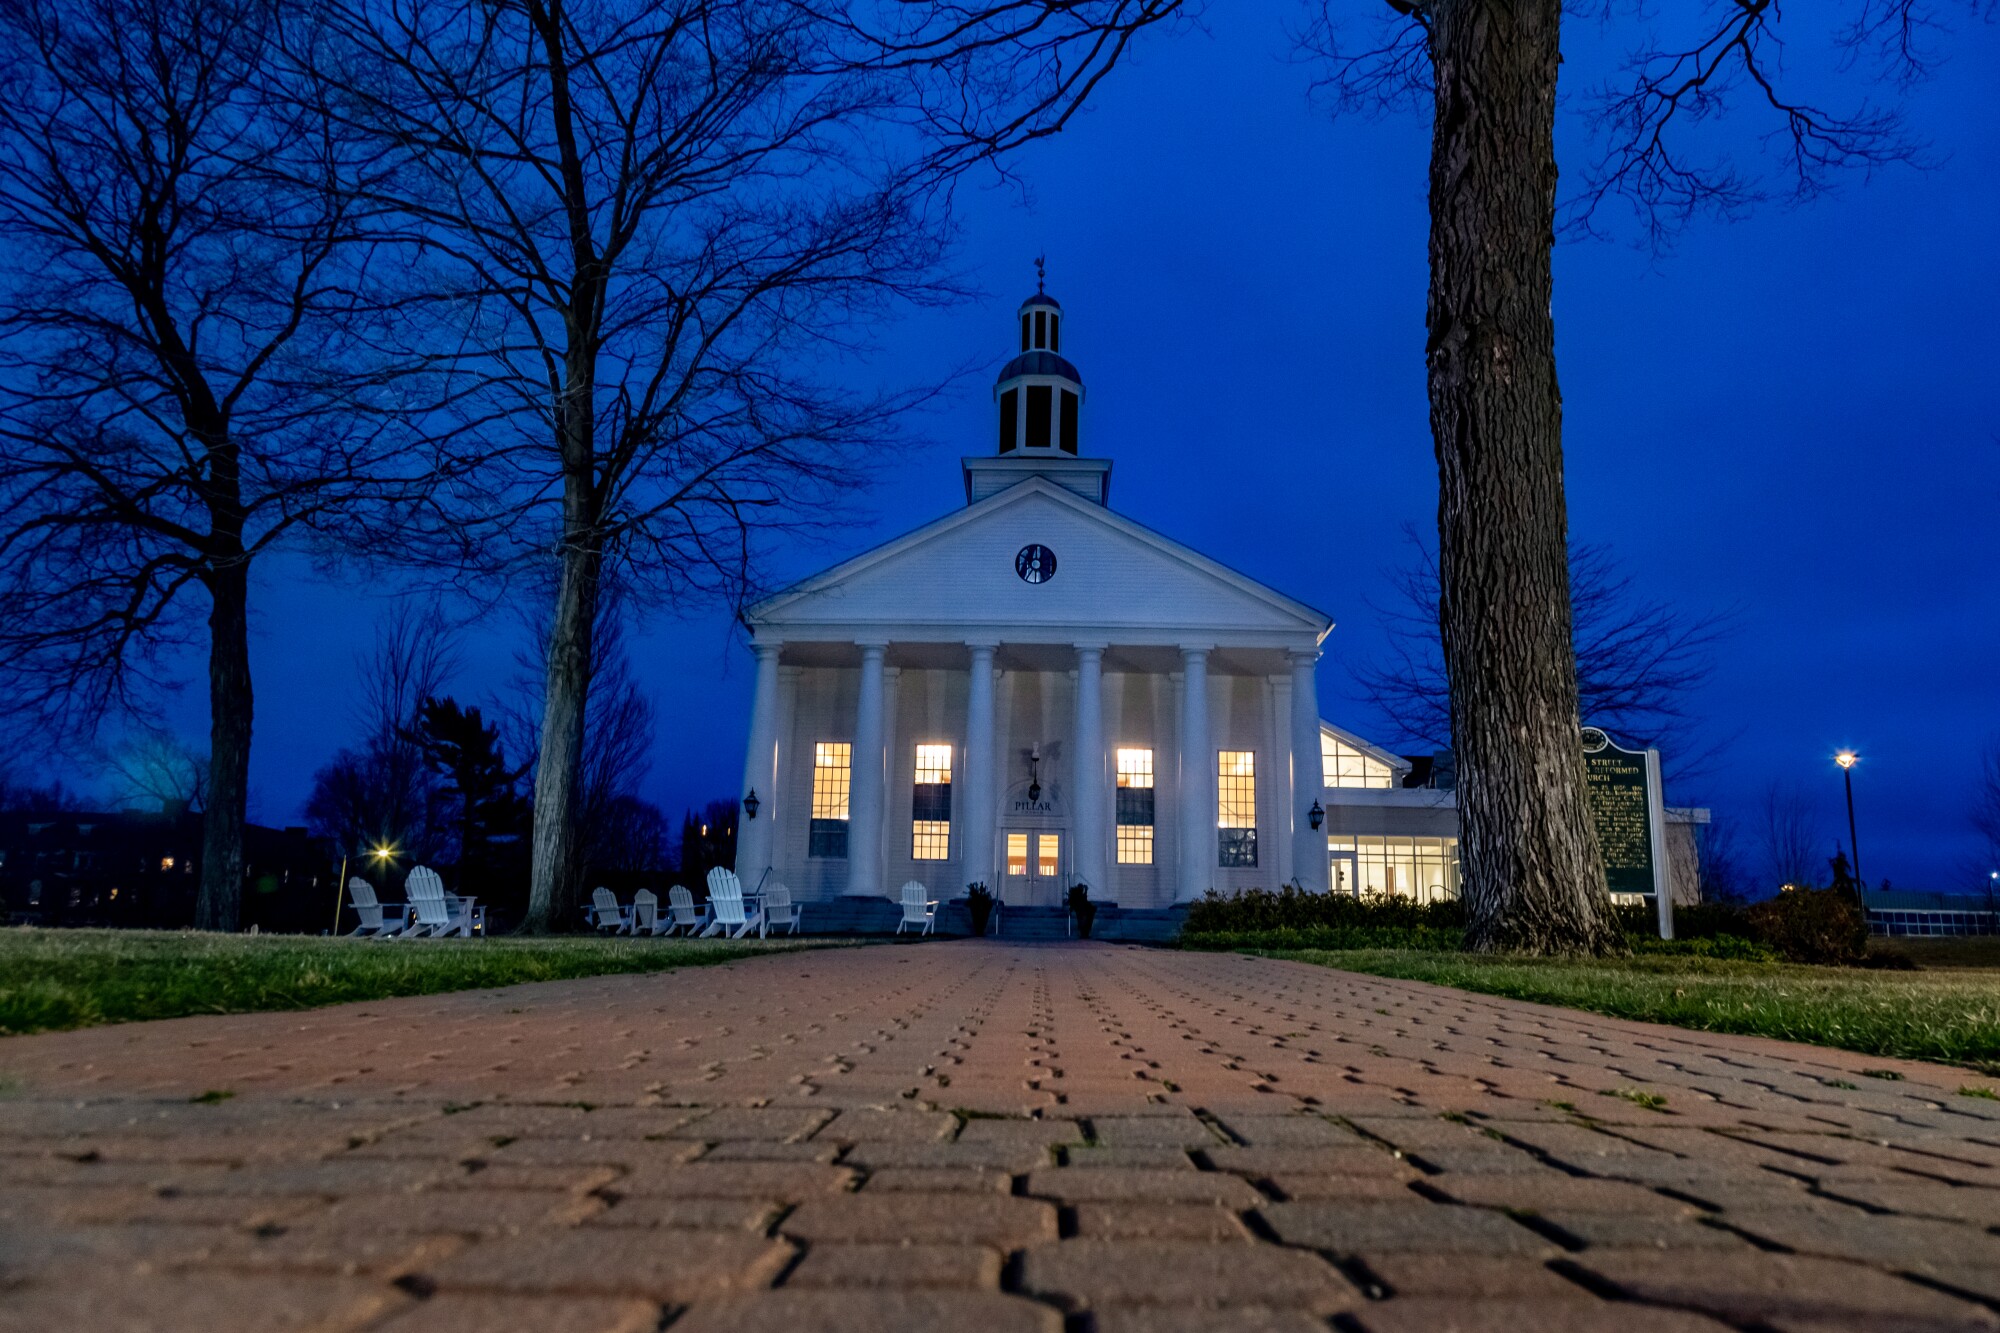 Light shines from a white building with several columns, sitting by bare trees against a dark sky at the end of a brick path.